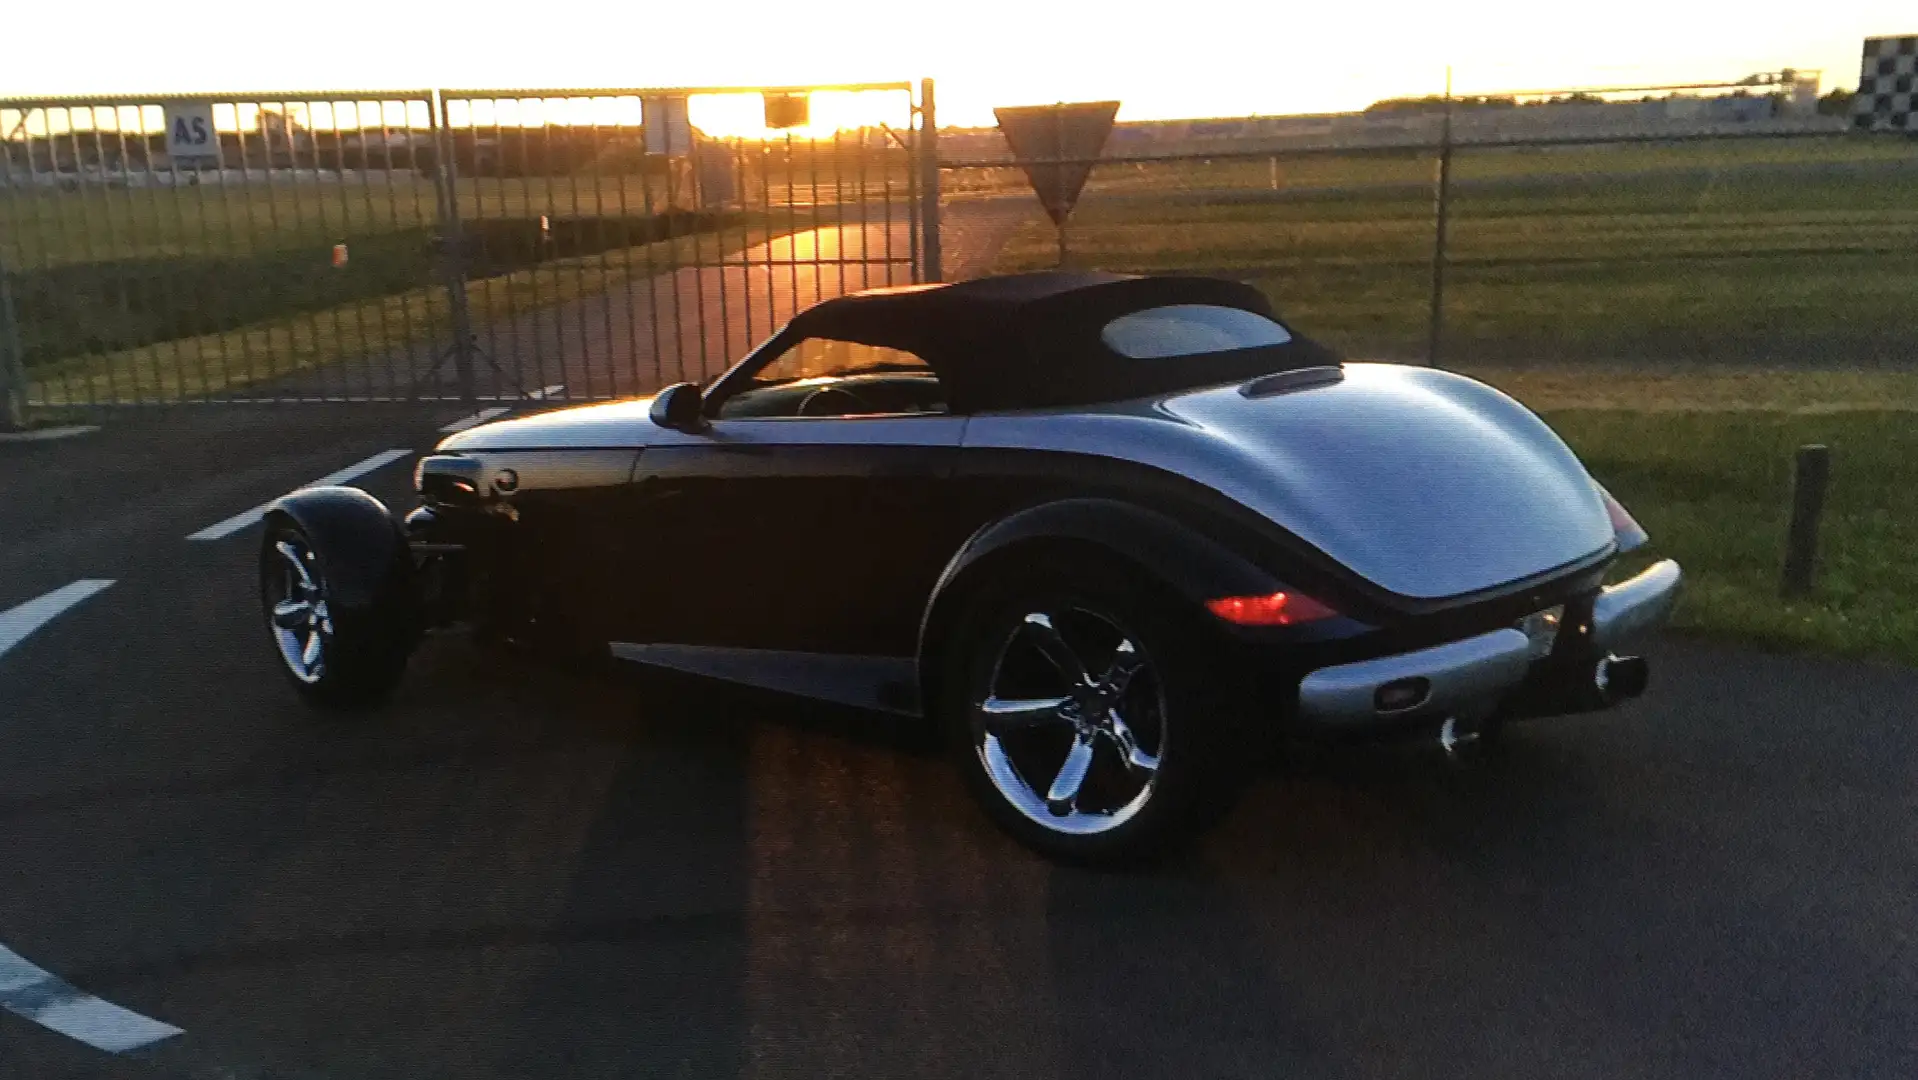 Plymouth Prowler # # # Cool Car for Crazy People # # # Mavi - 1